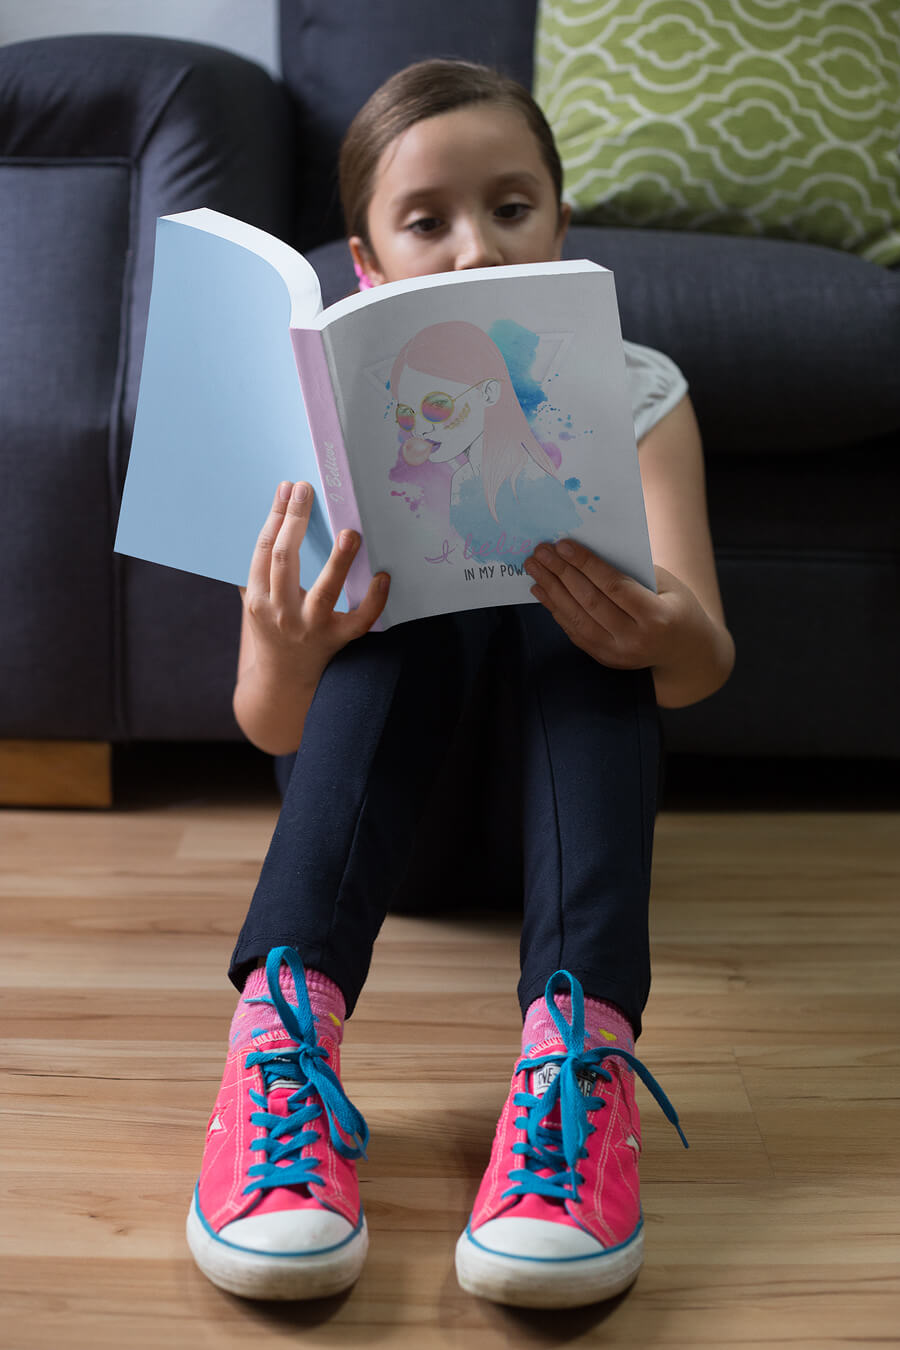 Girl Reading a Book While Sitting